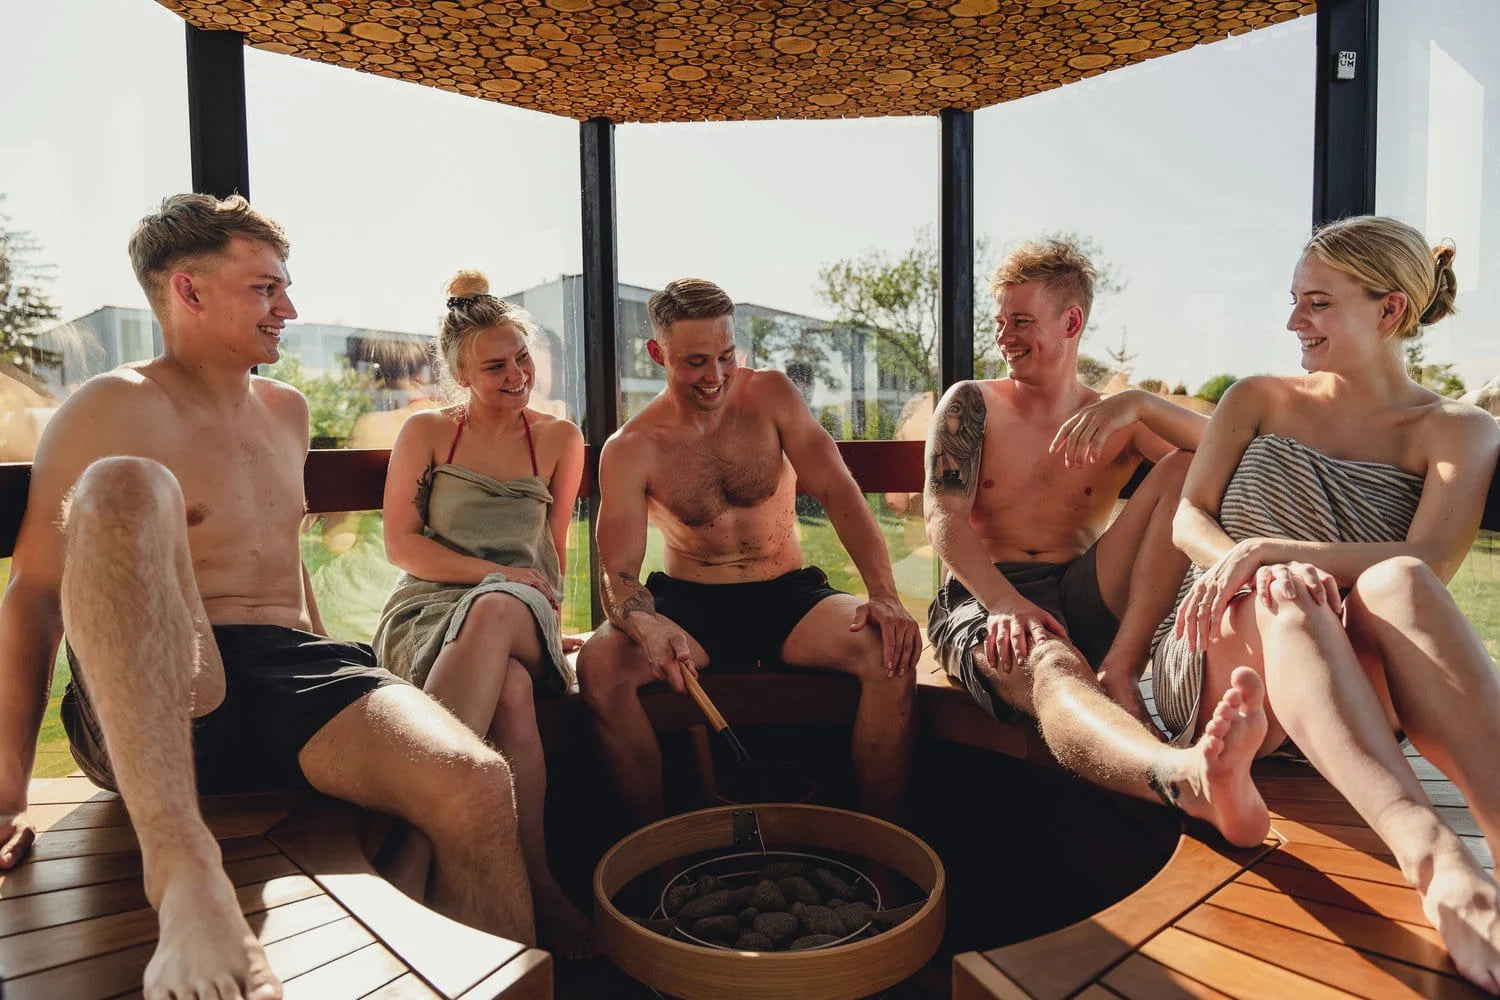 5 people sitting inside an outdoor sauna whilst smiling